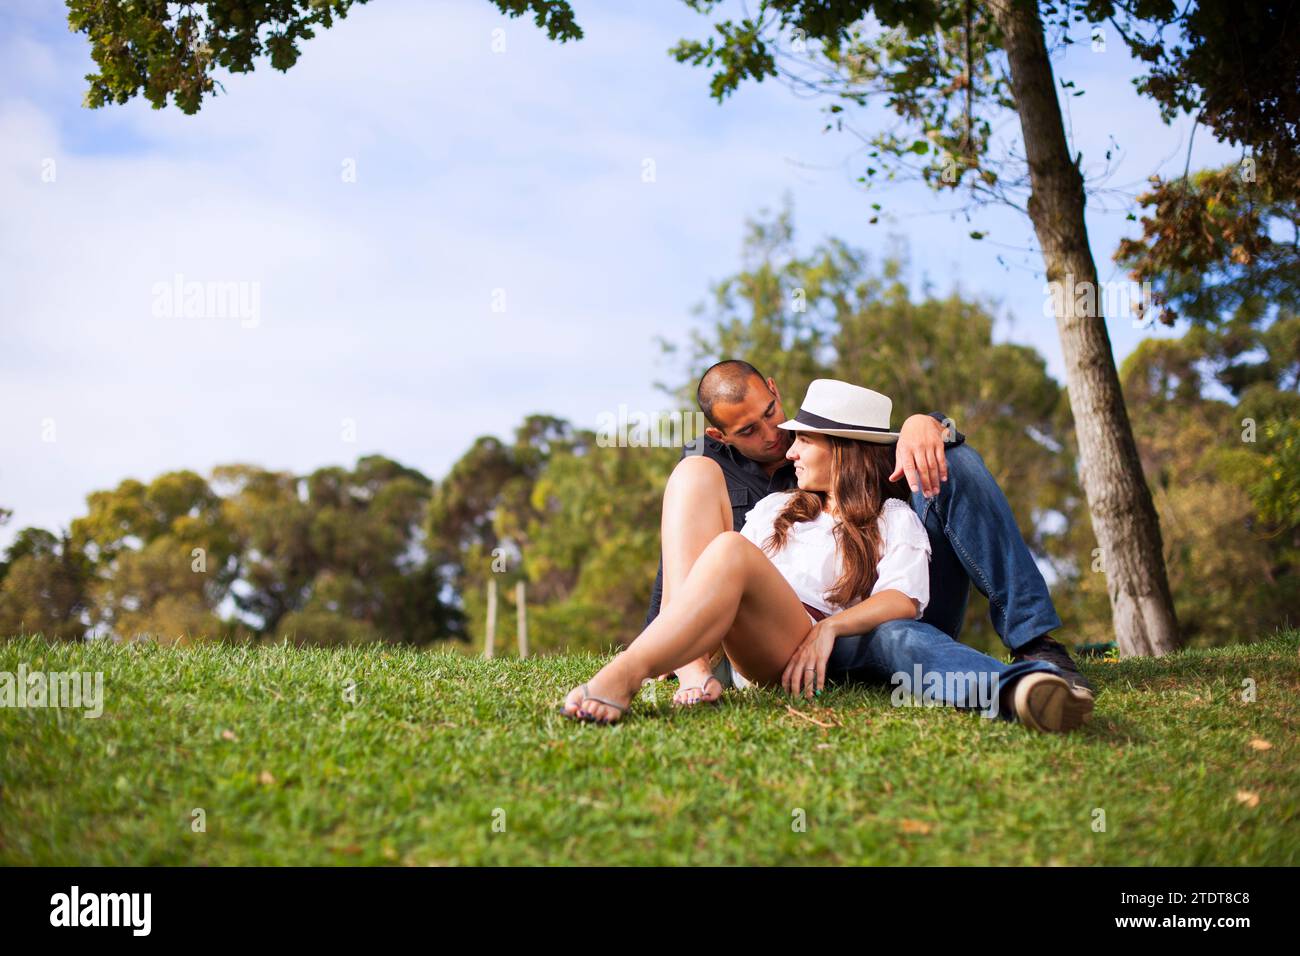 Passionate couple dating at the park Stock Photo